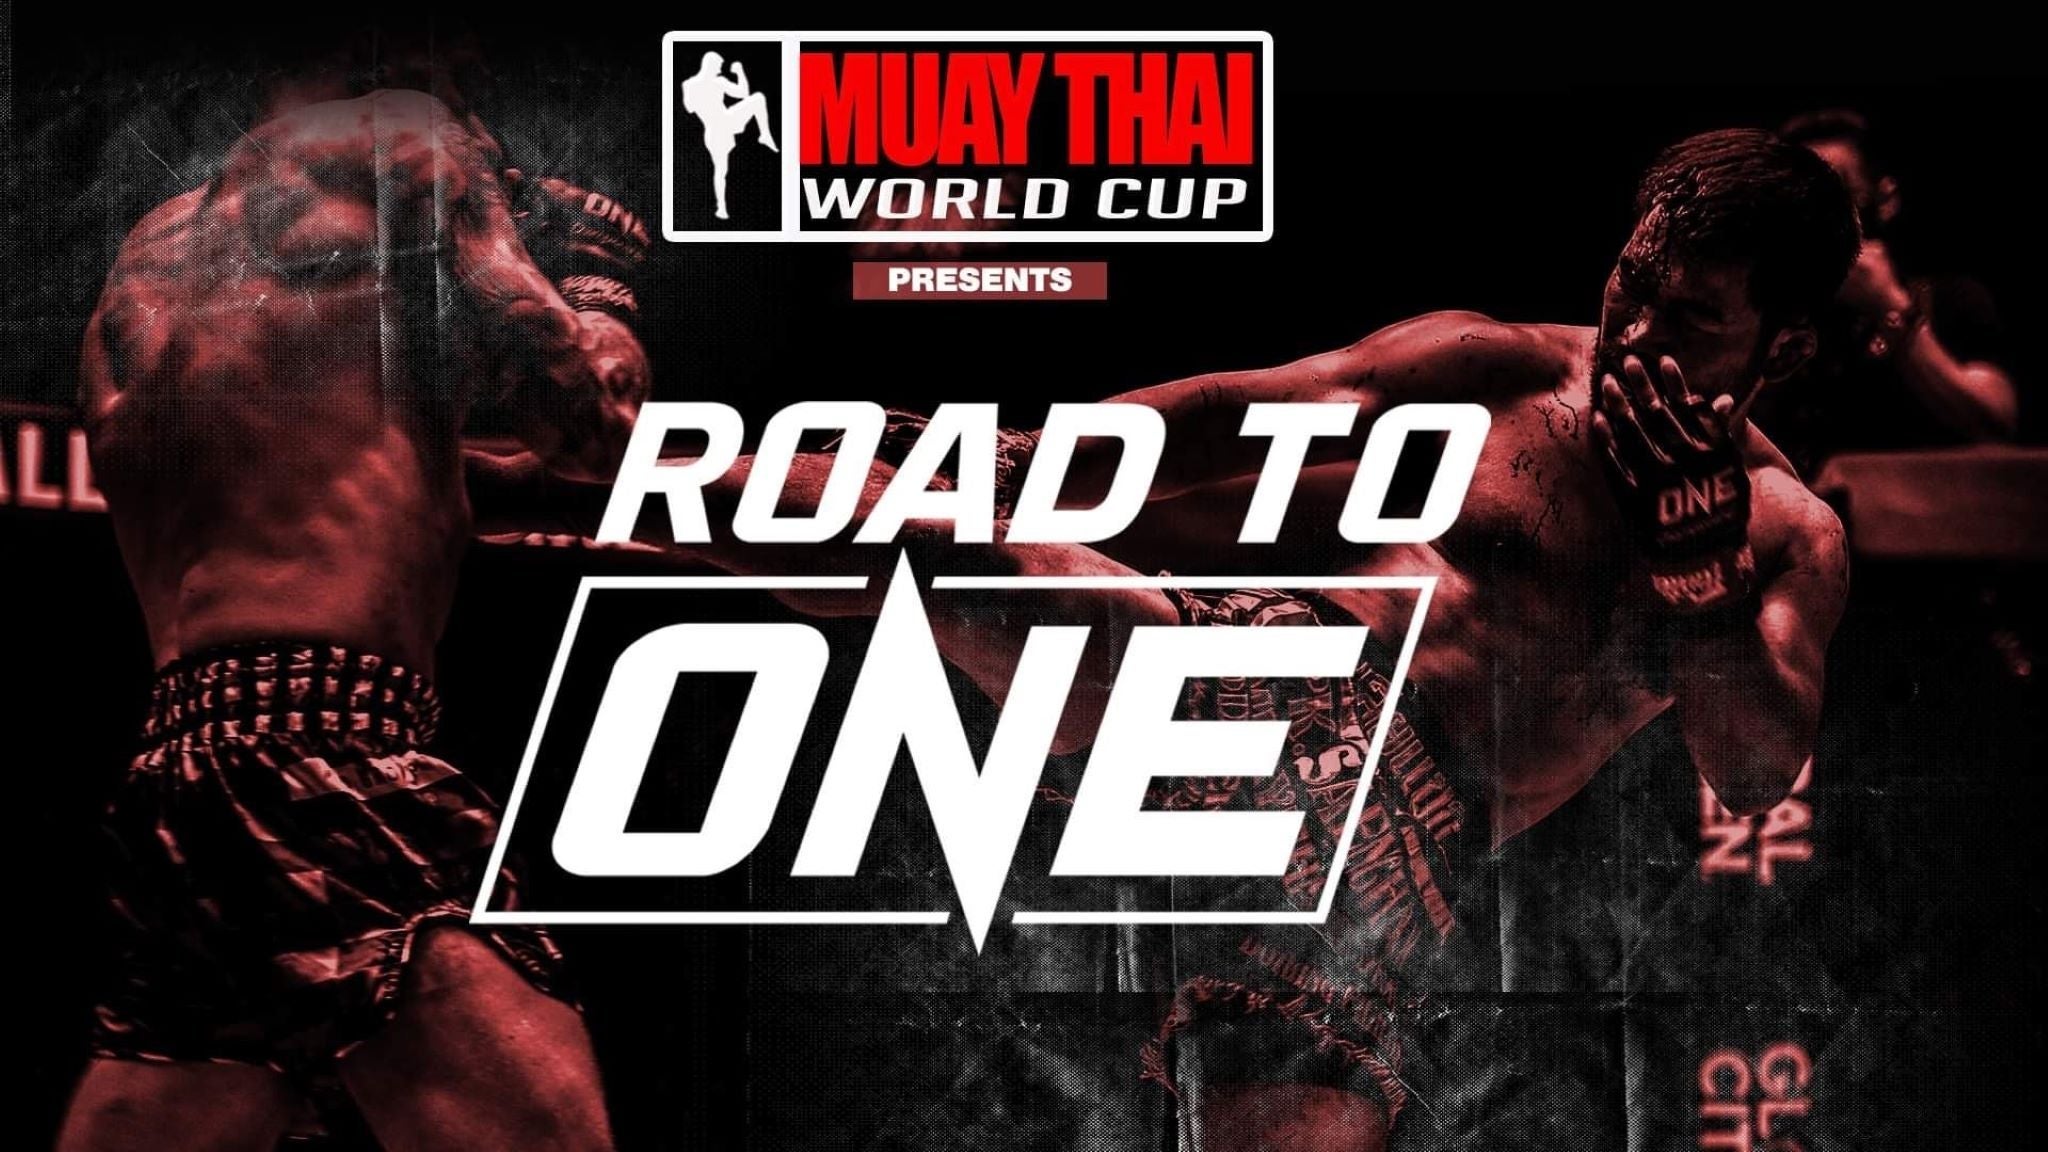 Muay Thai World Cup 10 in Calgary promo photo for Early Bird 10% Discount  presale offer code